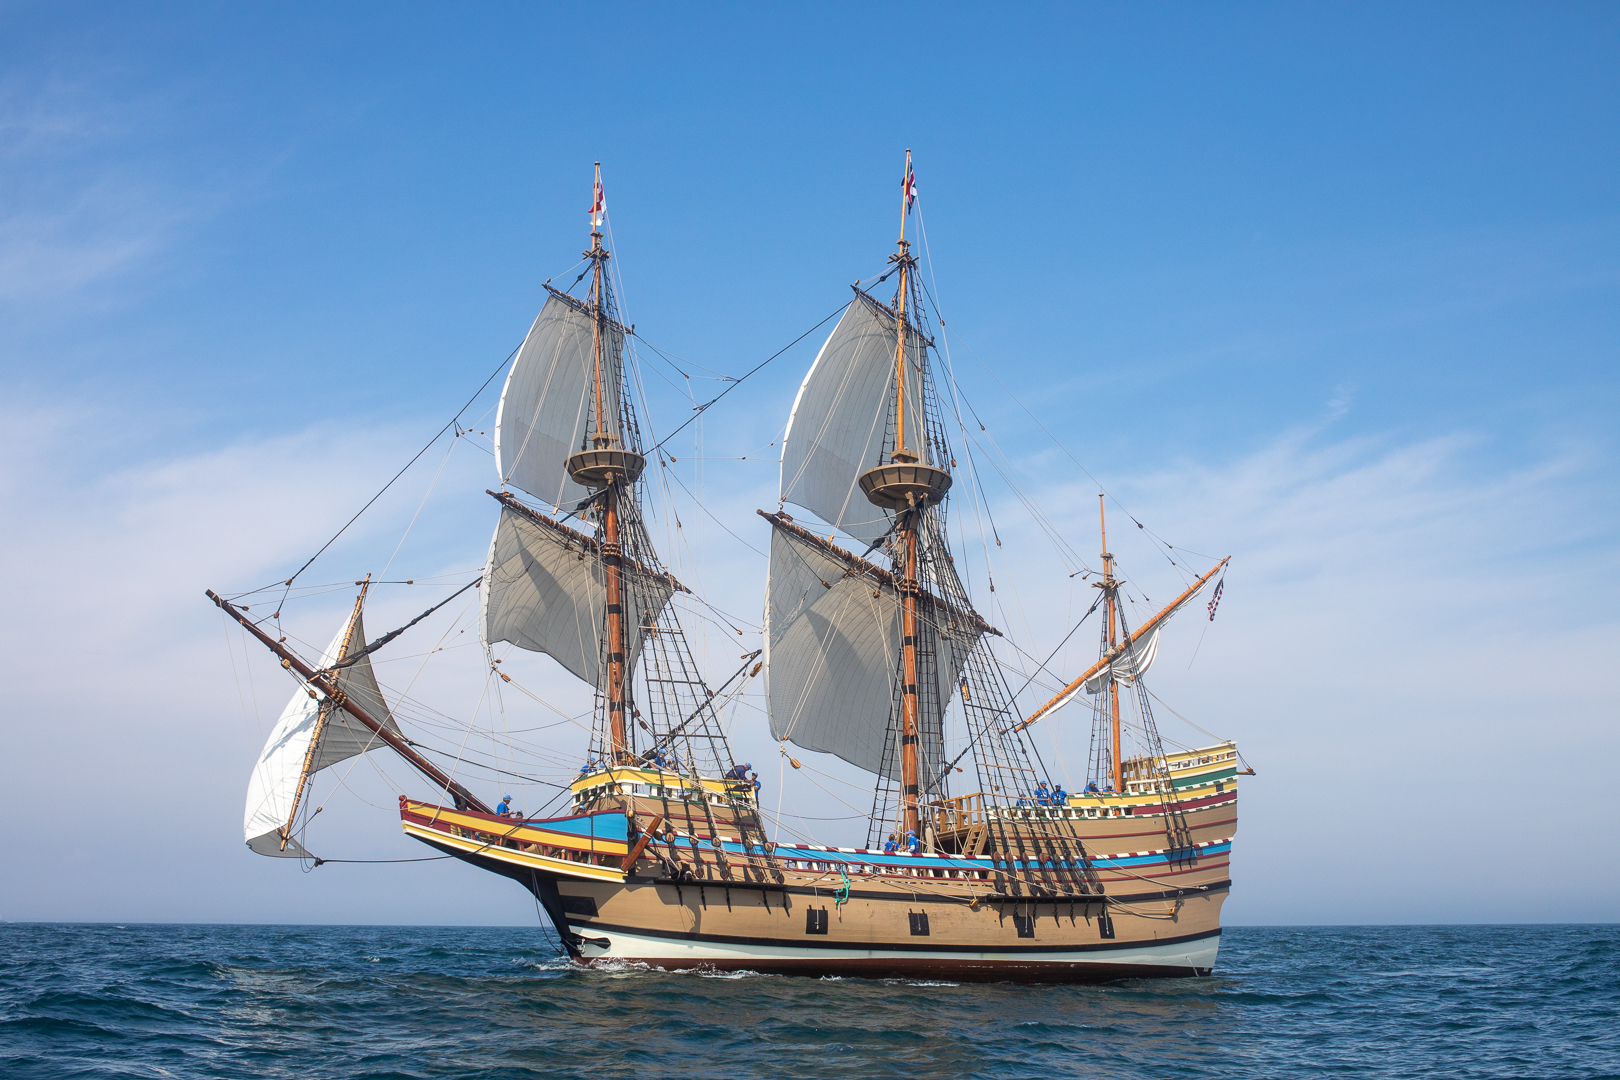 WindCheck Magazine Final Stages of MAYFLOWER II’s Homecoming Voyage